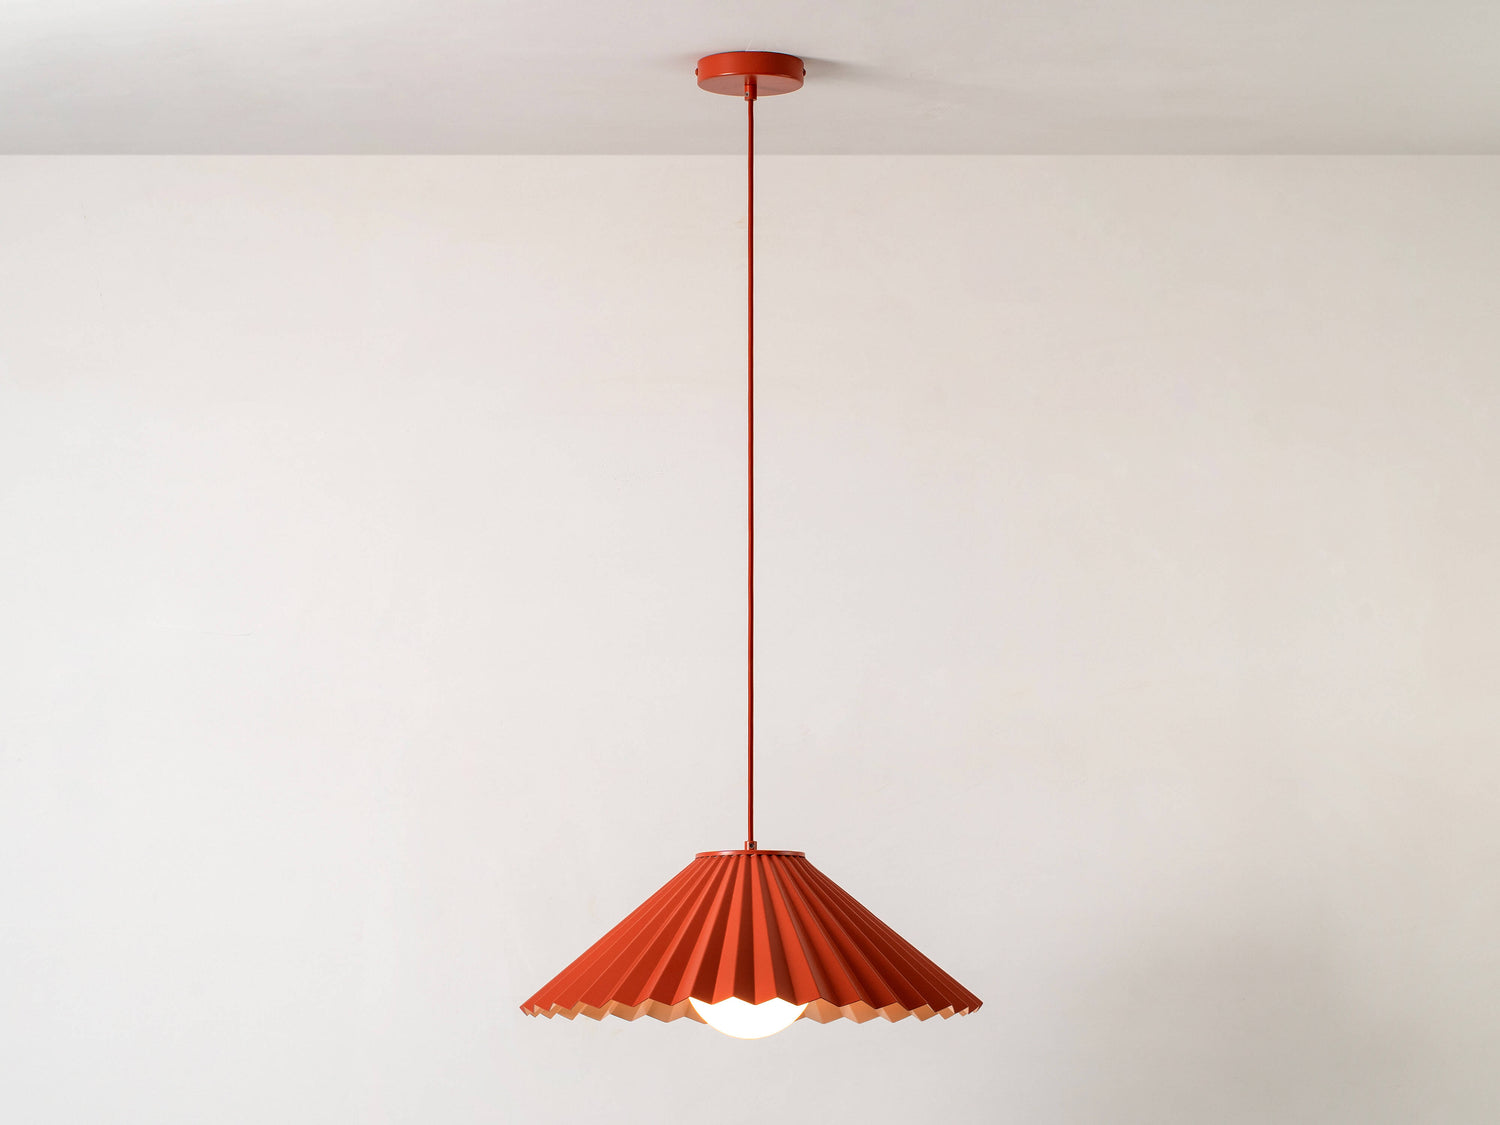 A large, fluted, pleated metal shade is suspended from a ceiling pendant. It is painted burnt orange on the outside, and pale pink on the inside. Light is on.